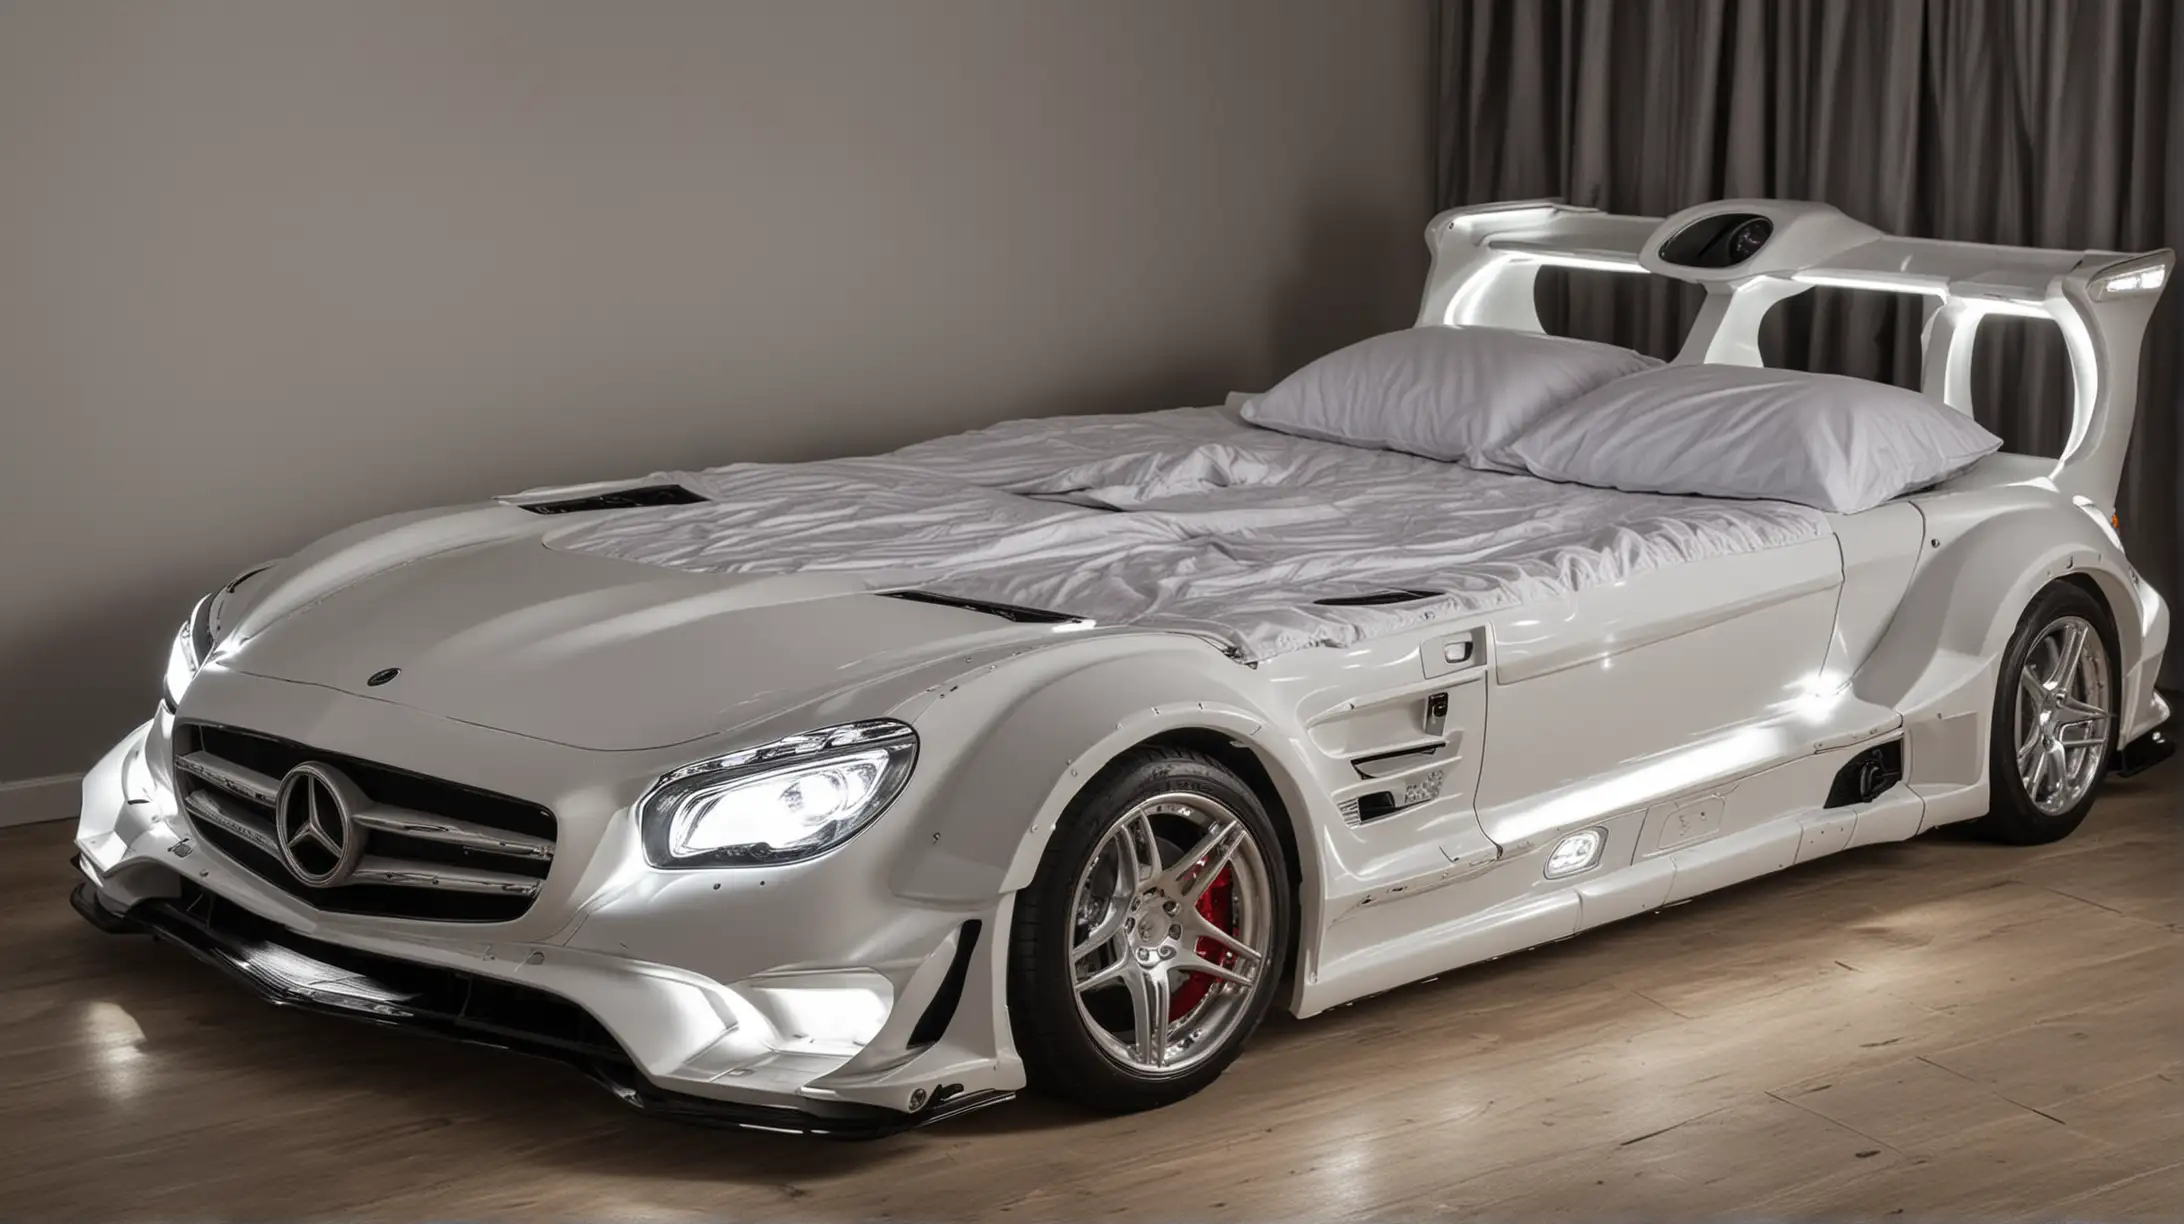 Double bed in the shape of a mersedes amg car with headlights on